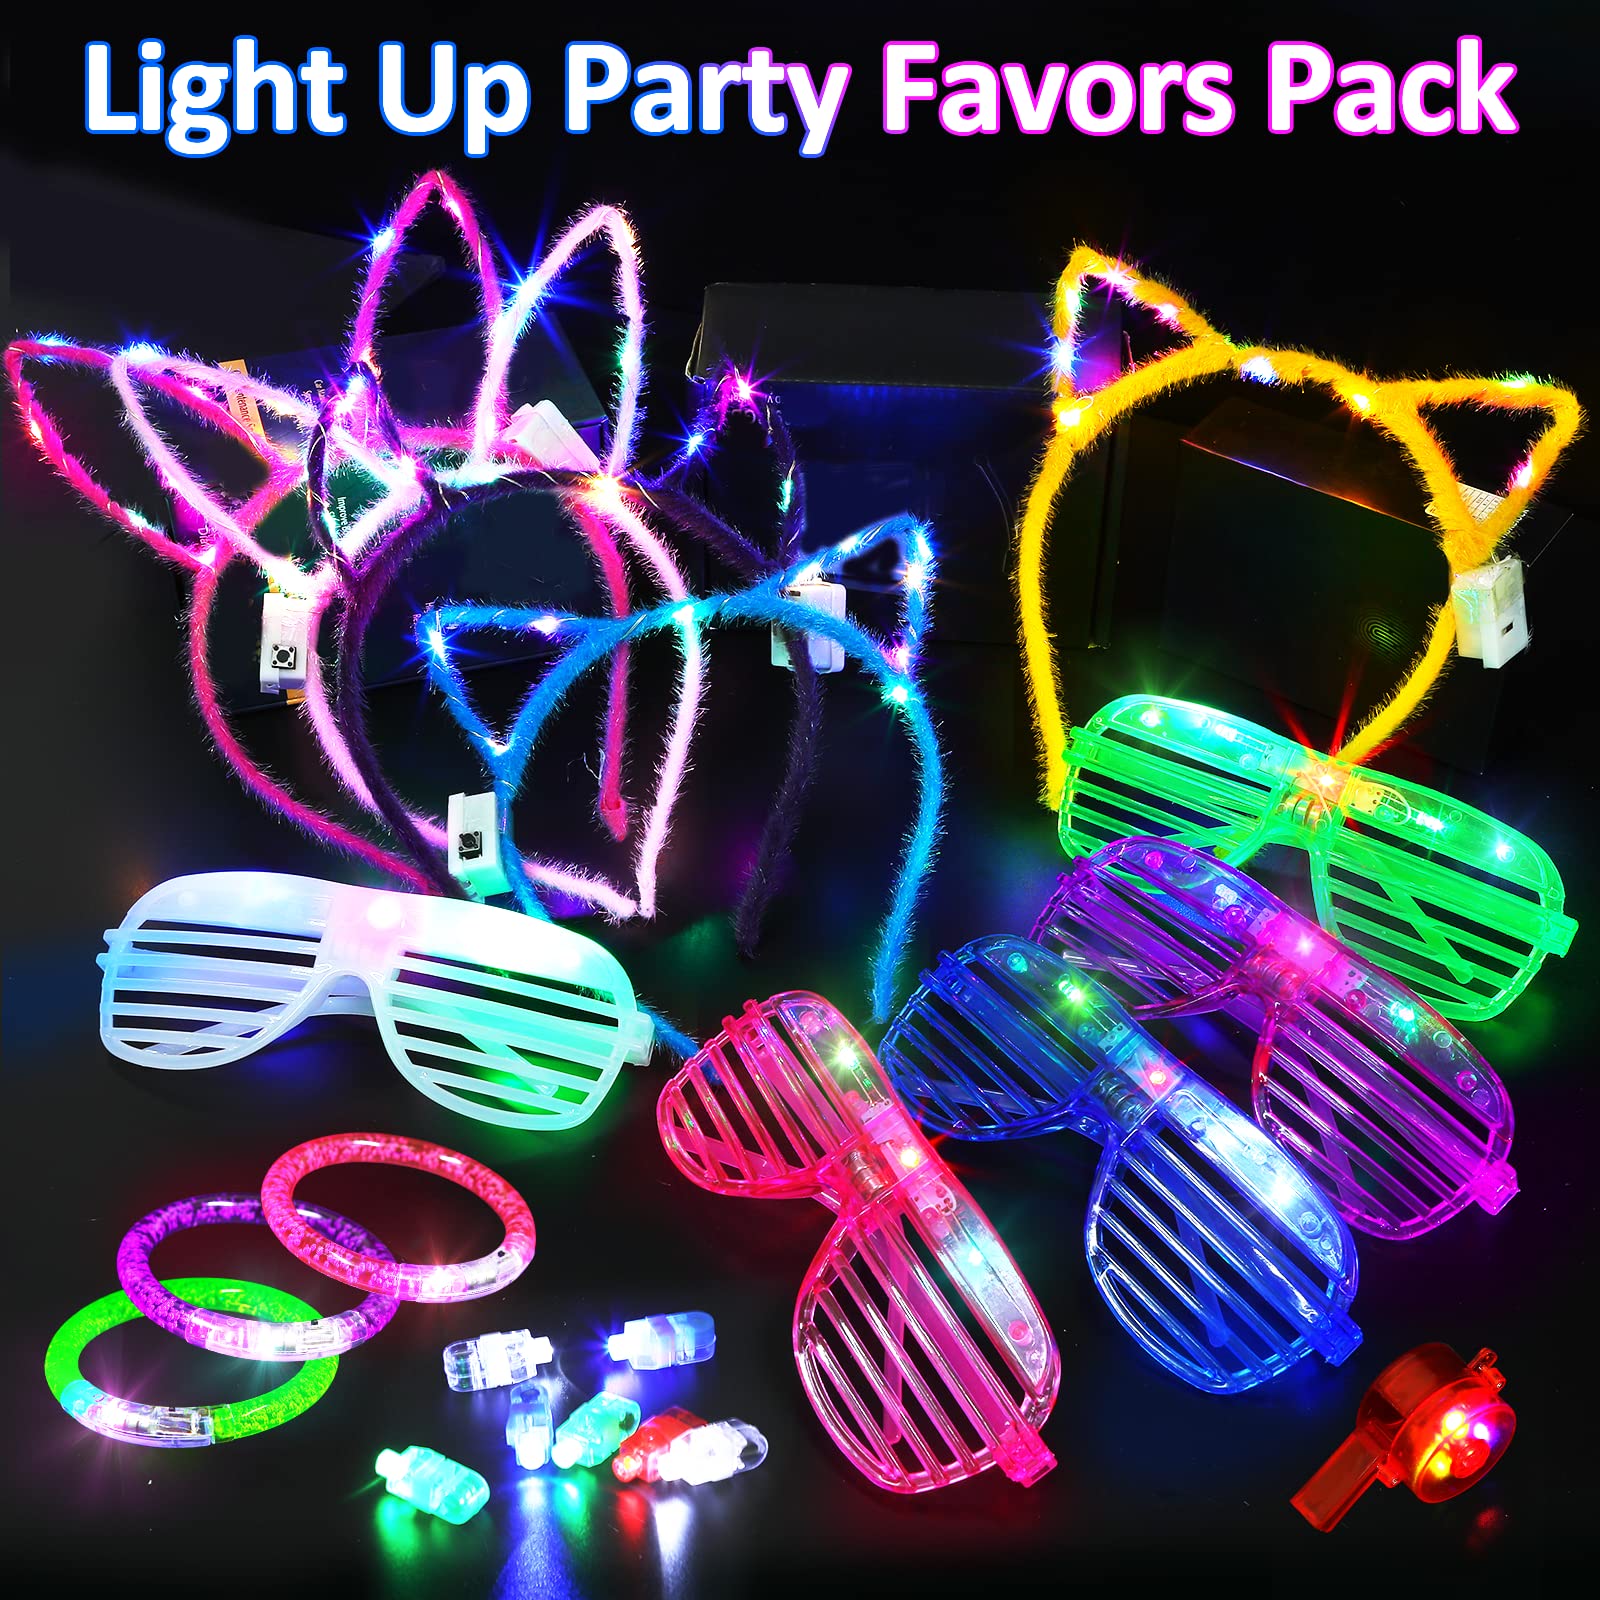 Fabeto Light Up Glow Party Supplies 65 Pack New Year Eve LED Glow In The Dark Birthday Neon Party Favors Accssories for Kids Adults, 5 Glasses 10 Bracelets 5 Headbands 5 Necklaces 40 Finger Lights